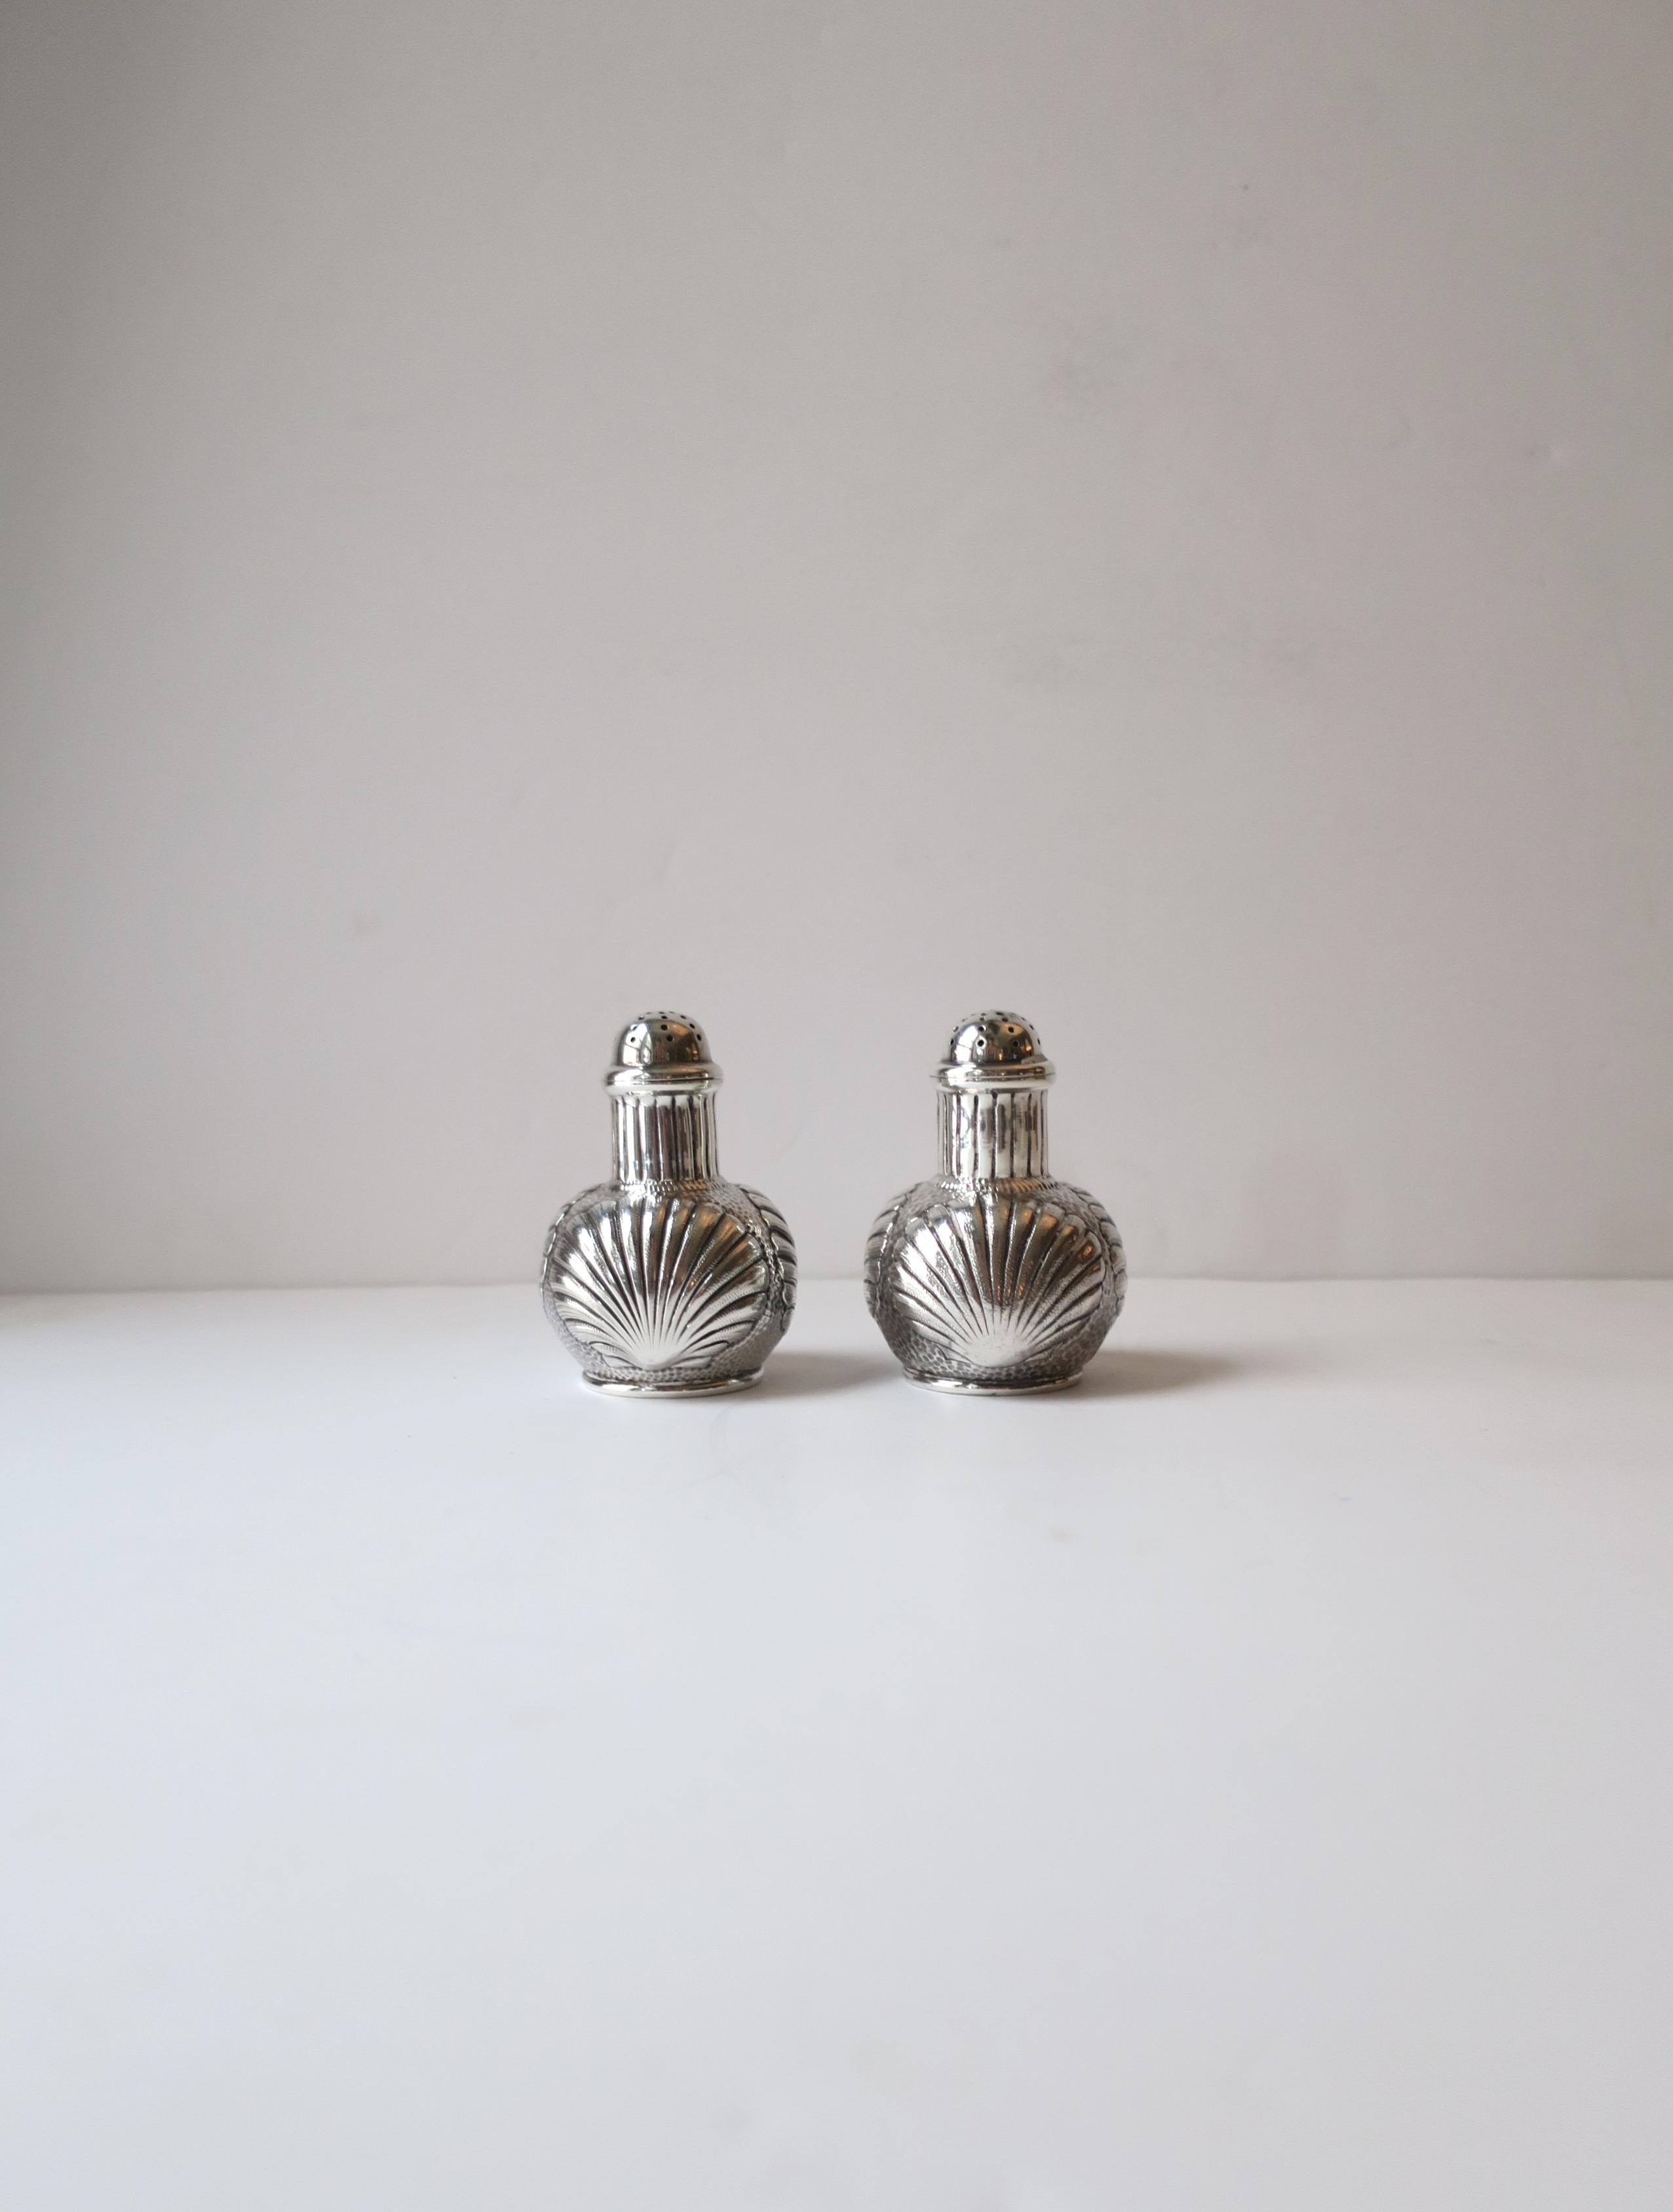 American Sterling Silver Salt & Pepper Shakers Scallop Seashell Design by Caldwell, Pair For Sale